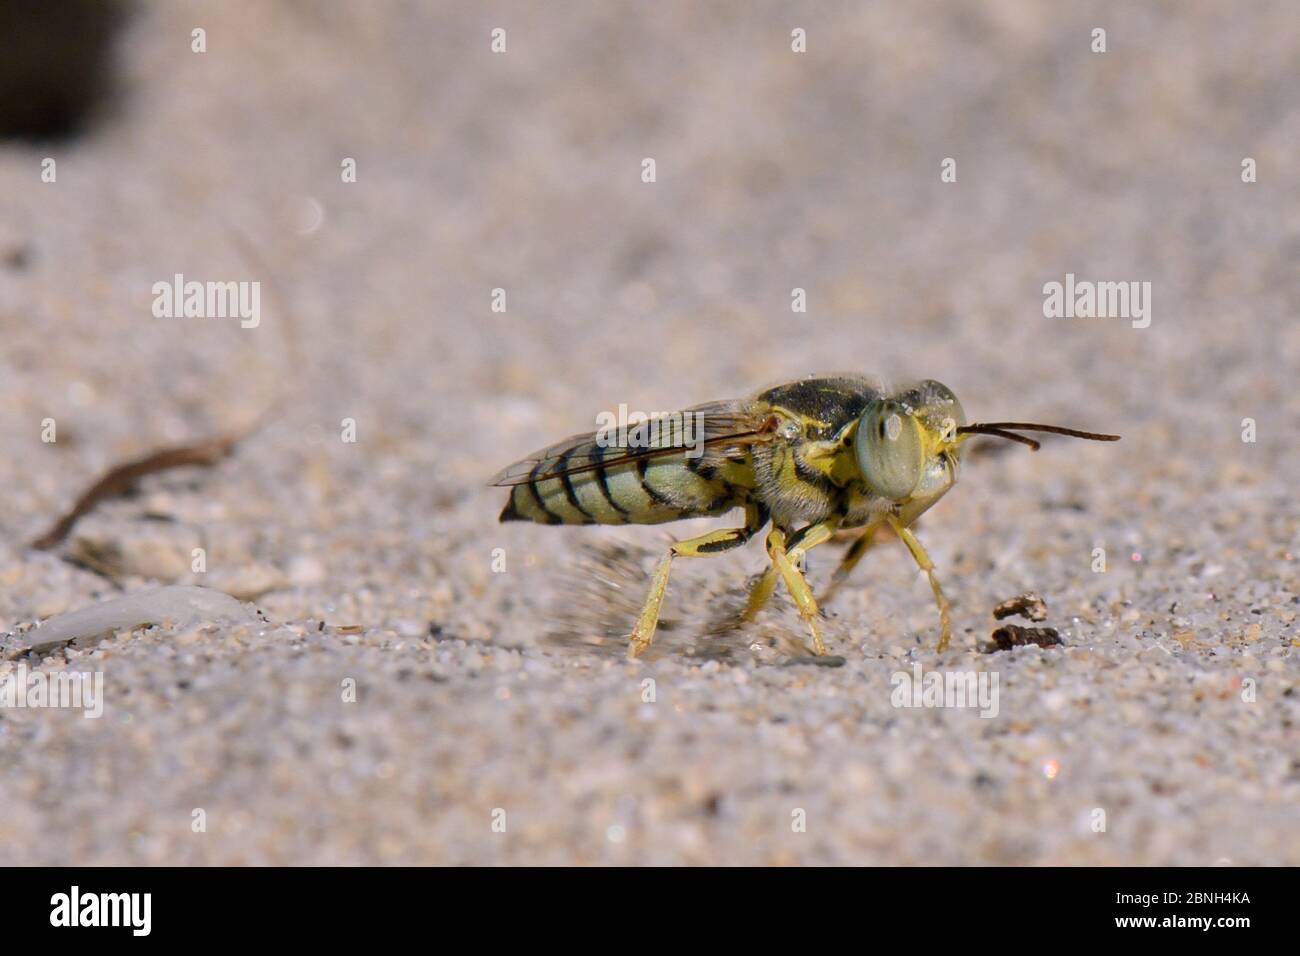 Female Sand wasp / Digger wasp (Bembix olivacea) excavating a nest hole in beach sand, flinging sand behind it as it works, Kos, Dodecanese Islands, G Stock Photo